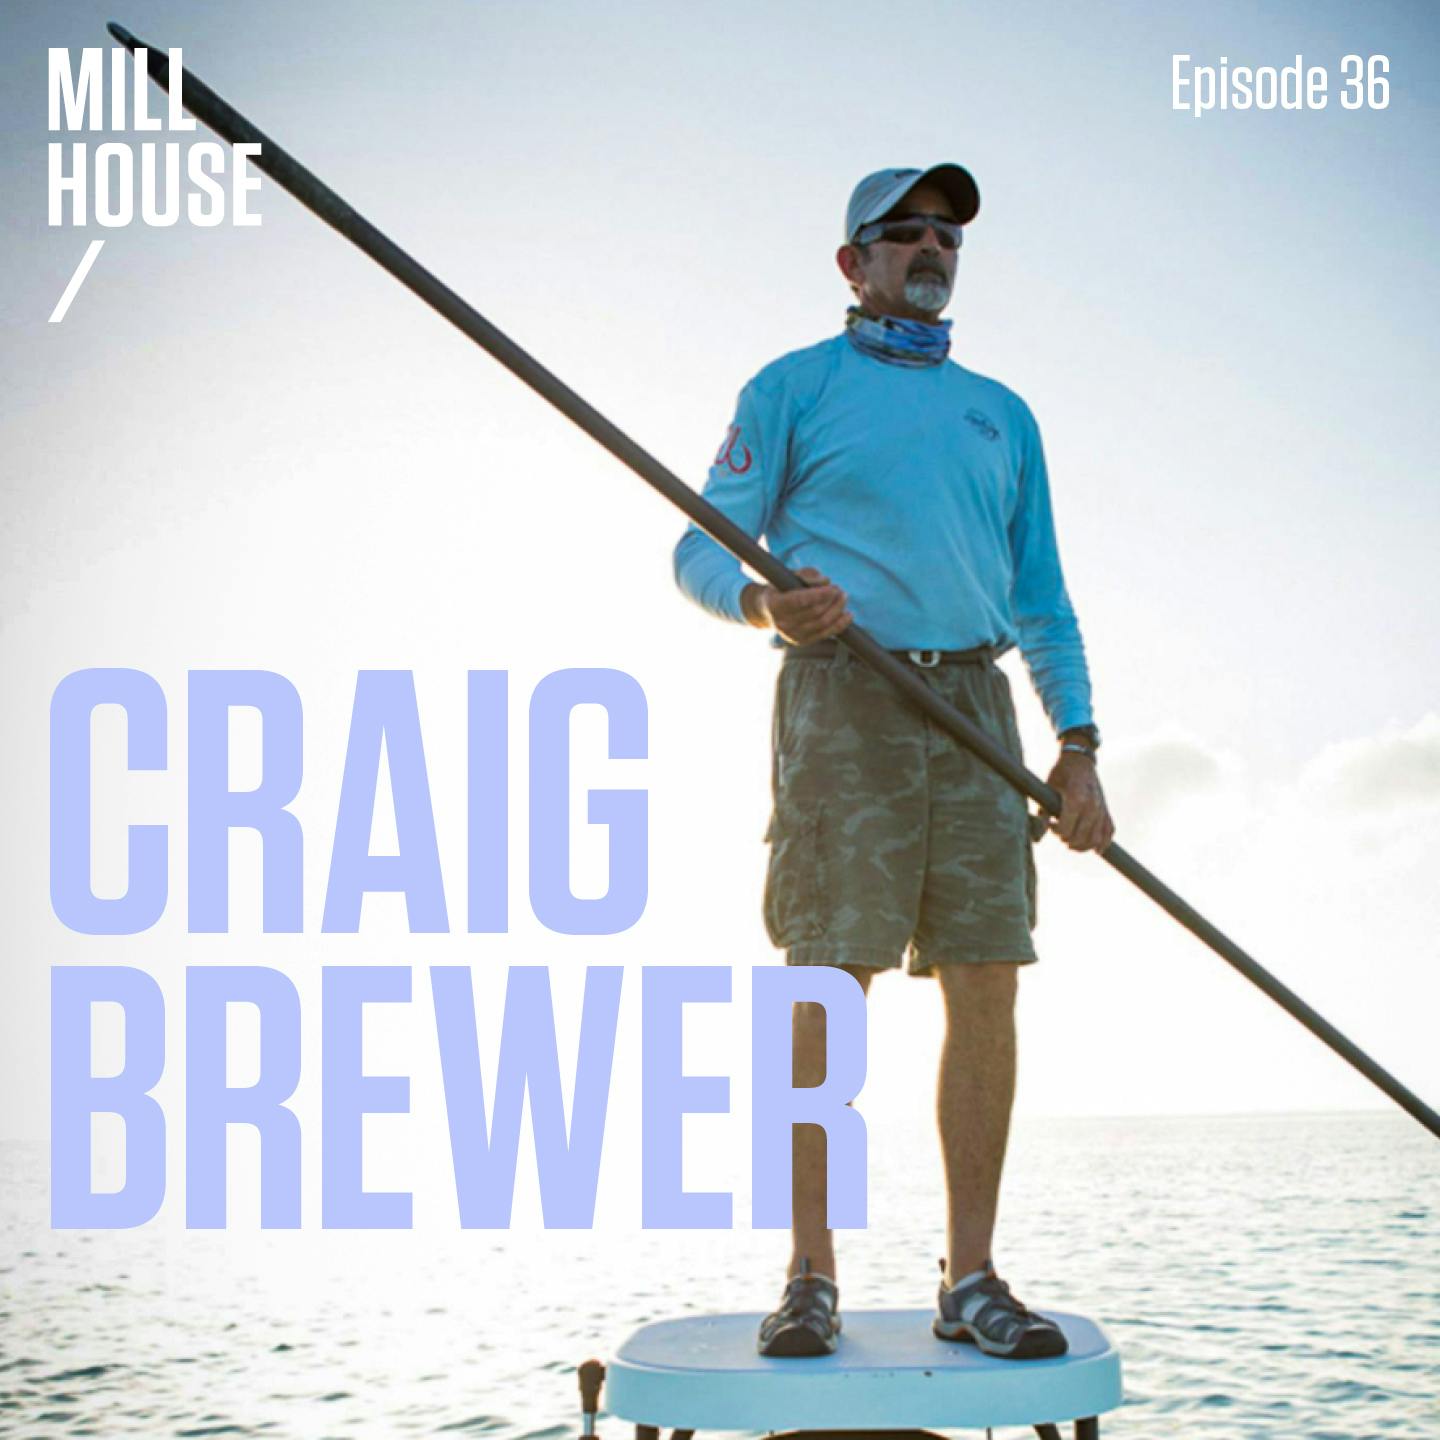 Episode 36: Capt. Craig Brewer - The Mud Man – Mill House Podcast – Podcast  – Podtail